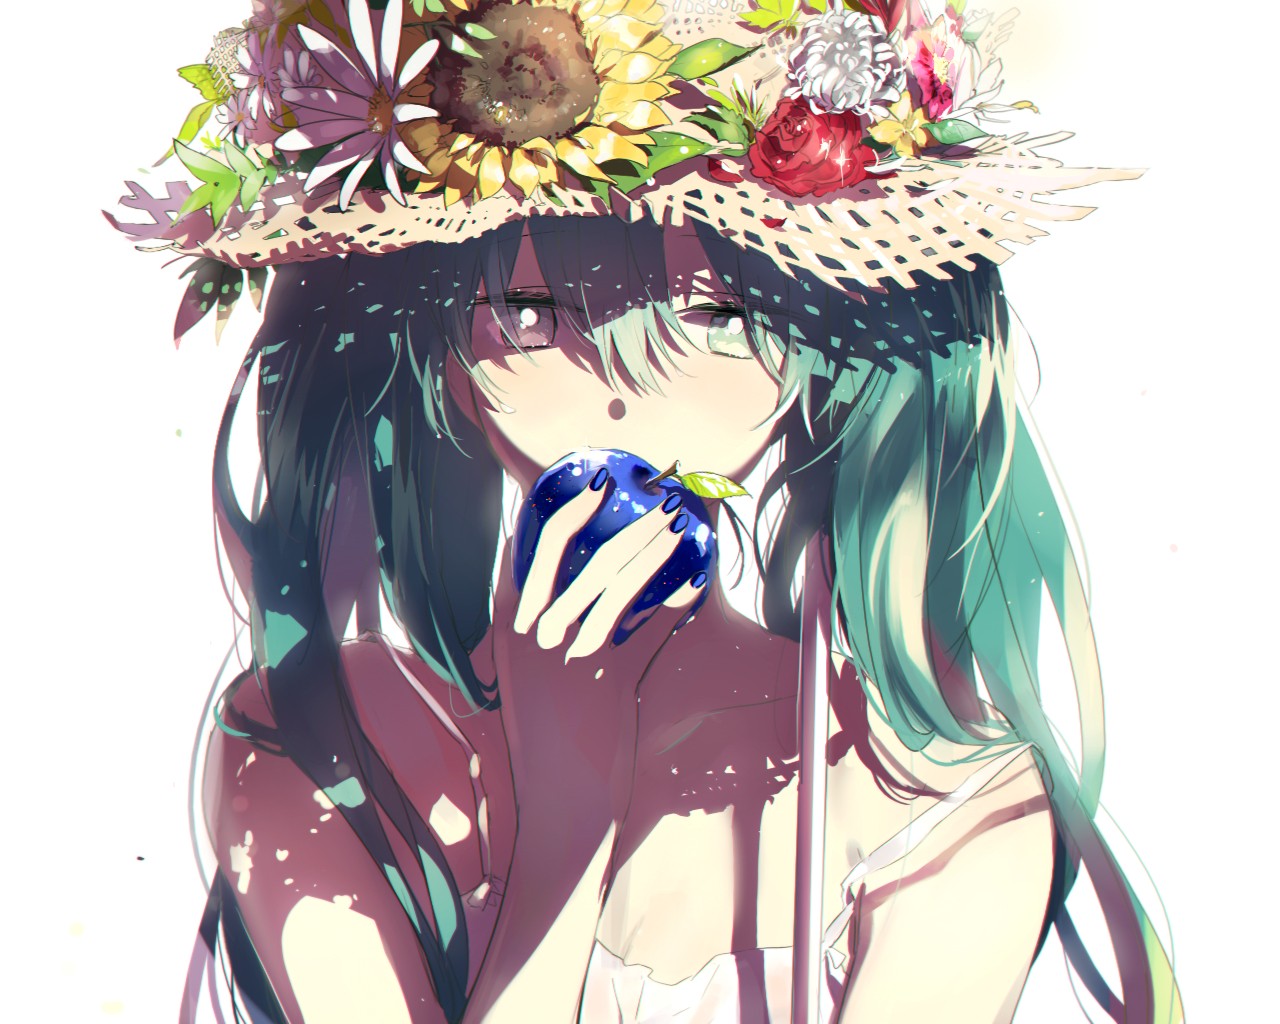 Anime 1280x1024 Vocaloid Hatsune Miku long hair twintails sun hats flowers apples simple background anime girls anime food fruit blue nails painted nails hat women with hats white background